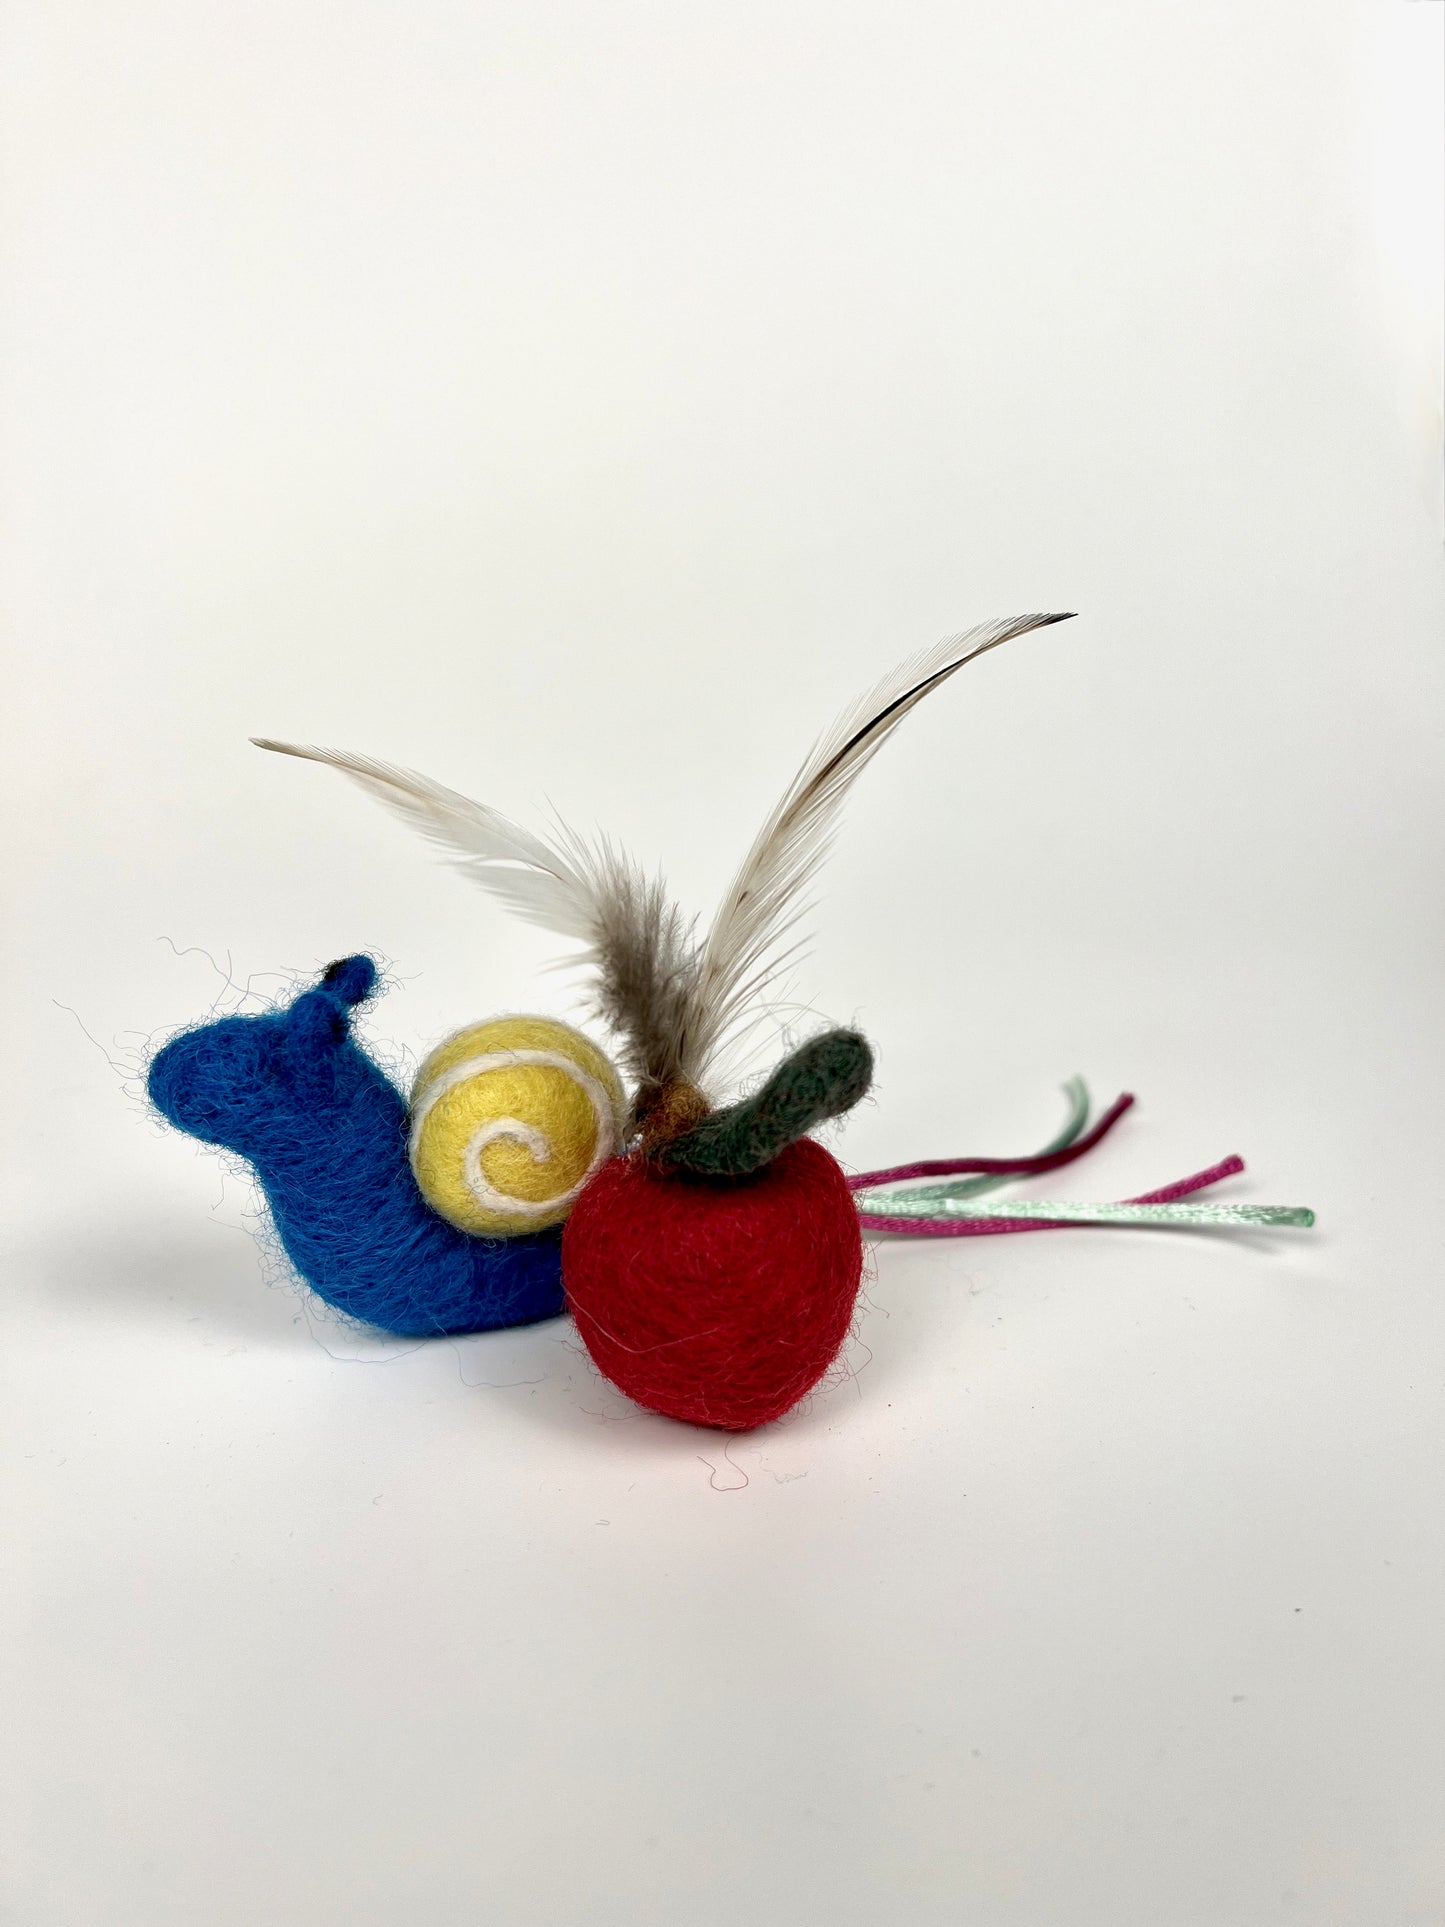 Apple and snail wool catnip toy